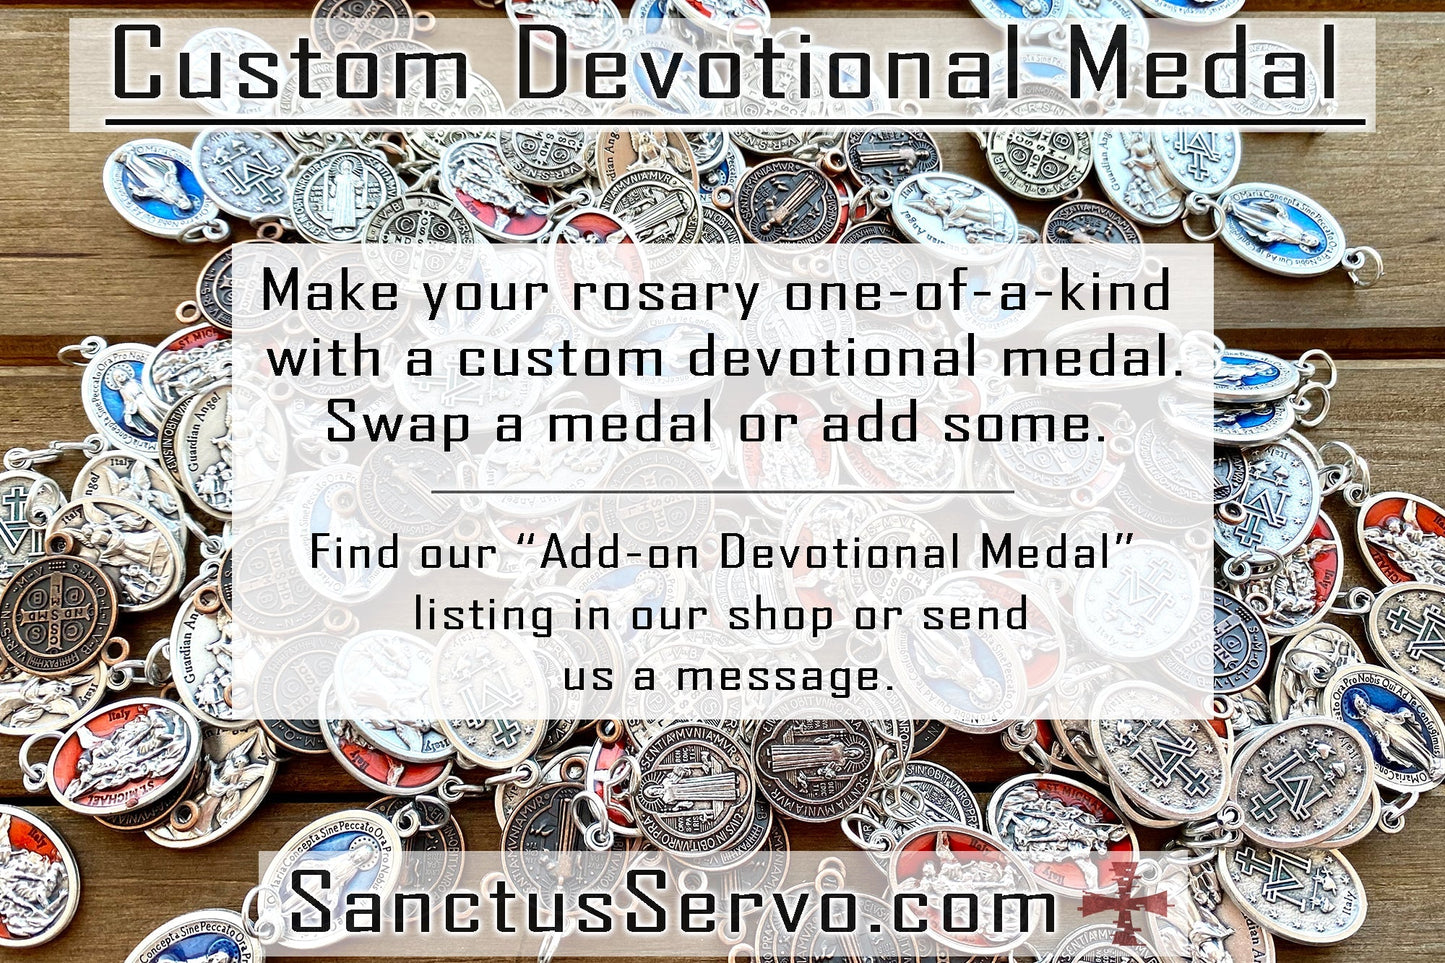 Add a unique touch to your rosary with our premium Catholic Patron Saint Medals! Choose from over 60 devotional medal options, perfect for deepening your faith or gifting to a loved one. Customize your prayer experience today and make it truly unbreakable with our durable paracord rosaries at Sanctus Servo.